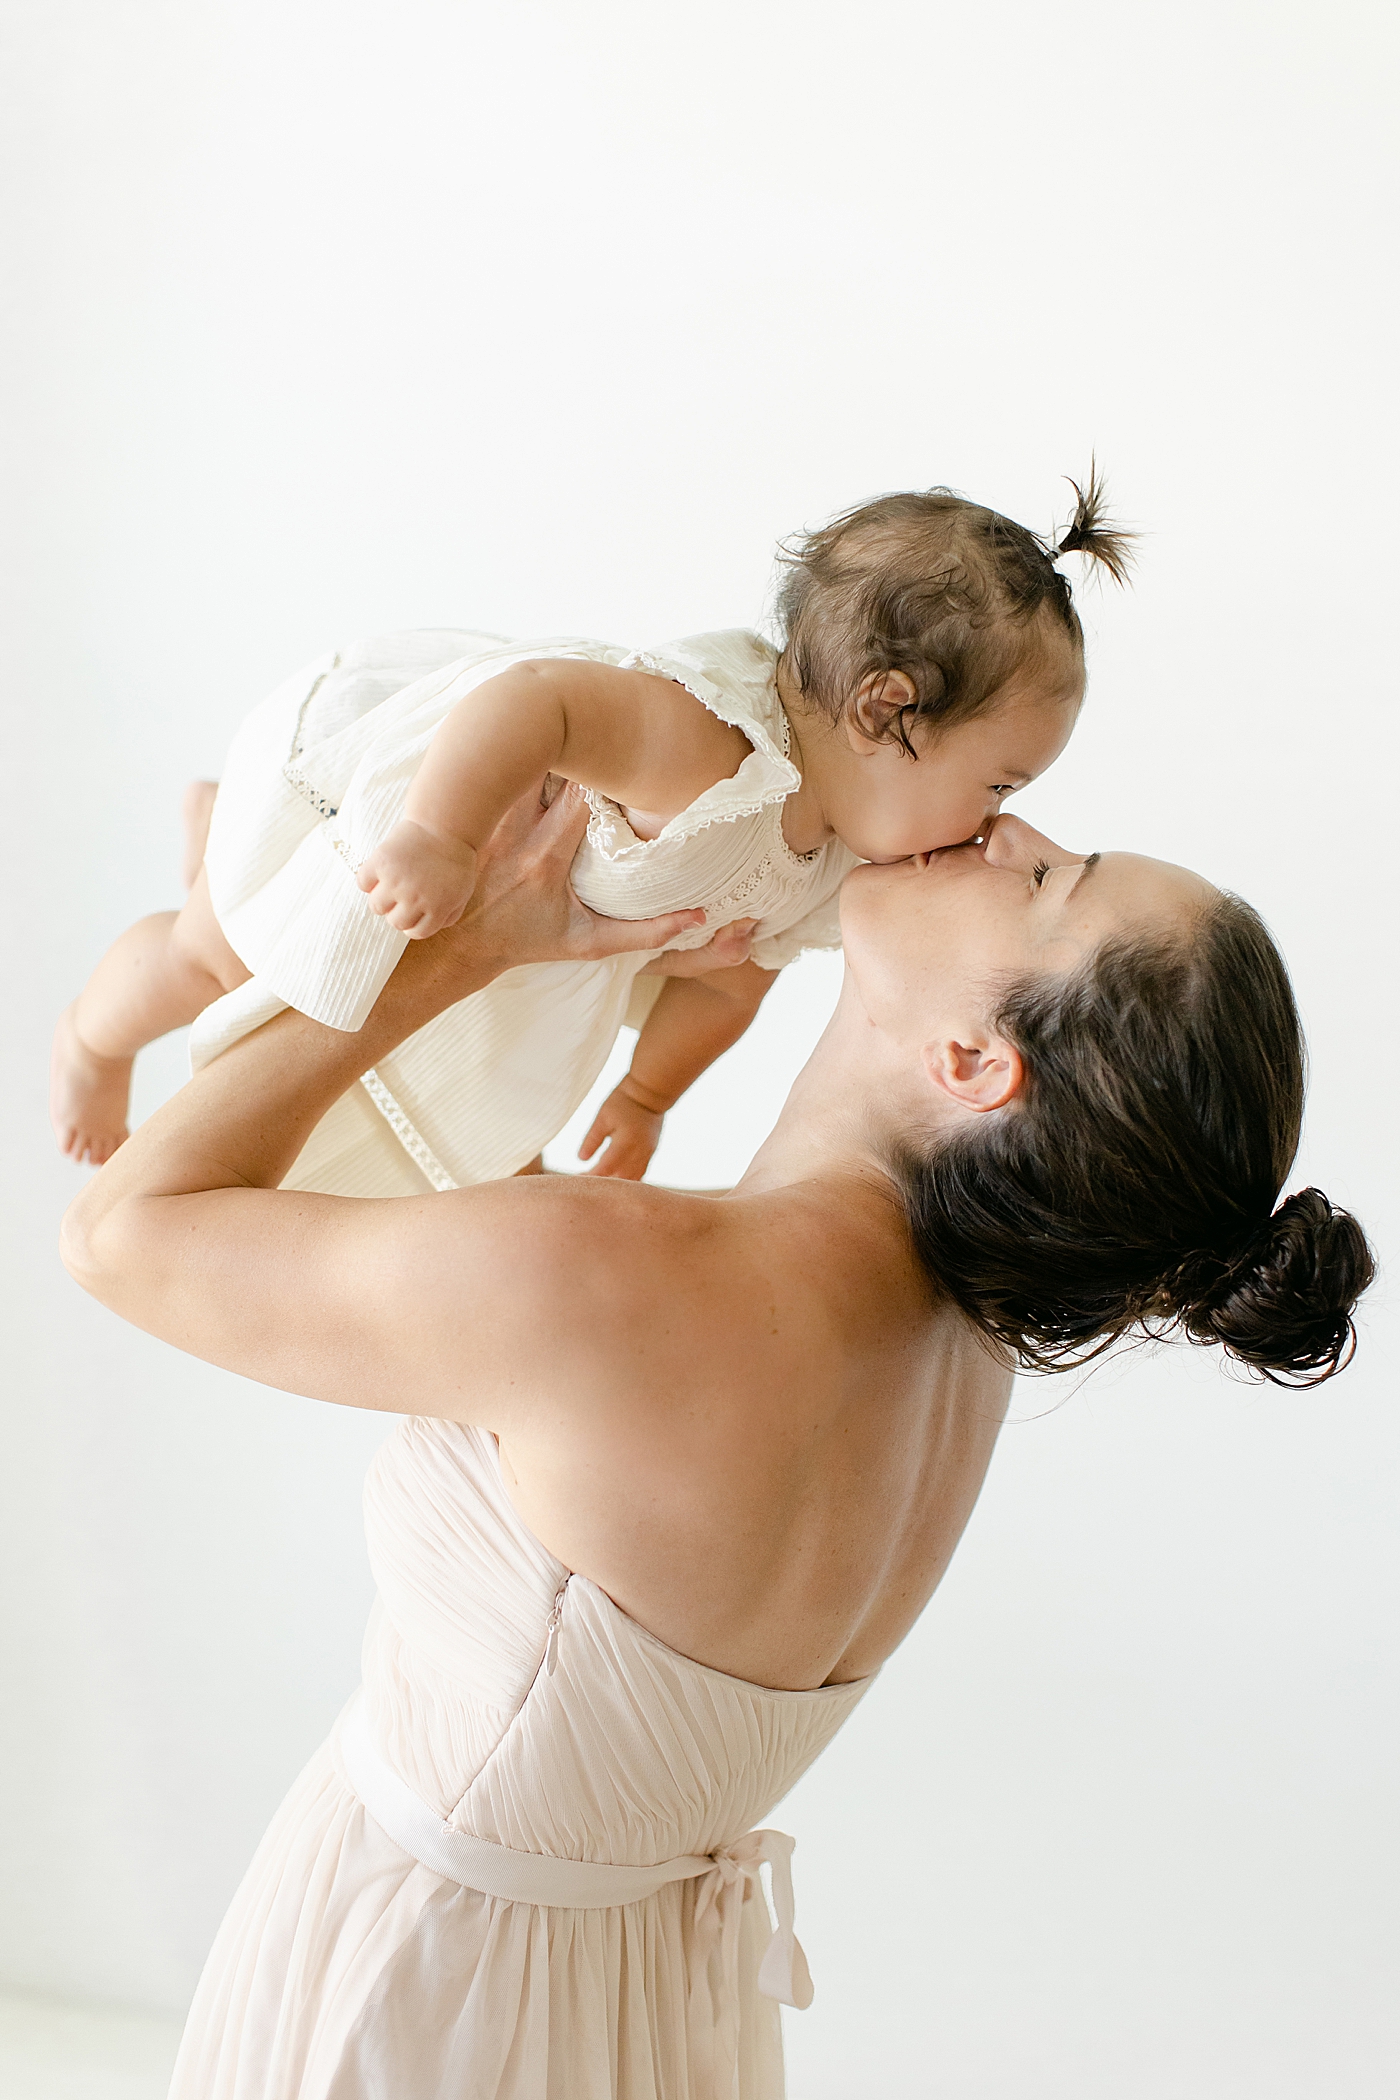 Mom playing airplane with her baby girl in matching dresses | Image by Chrissy Winchester Photography